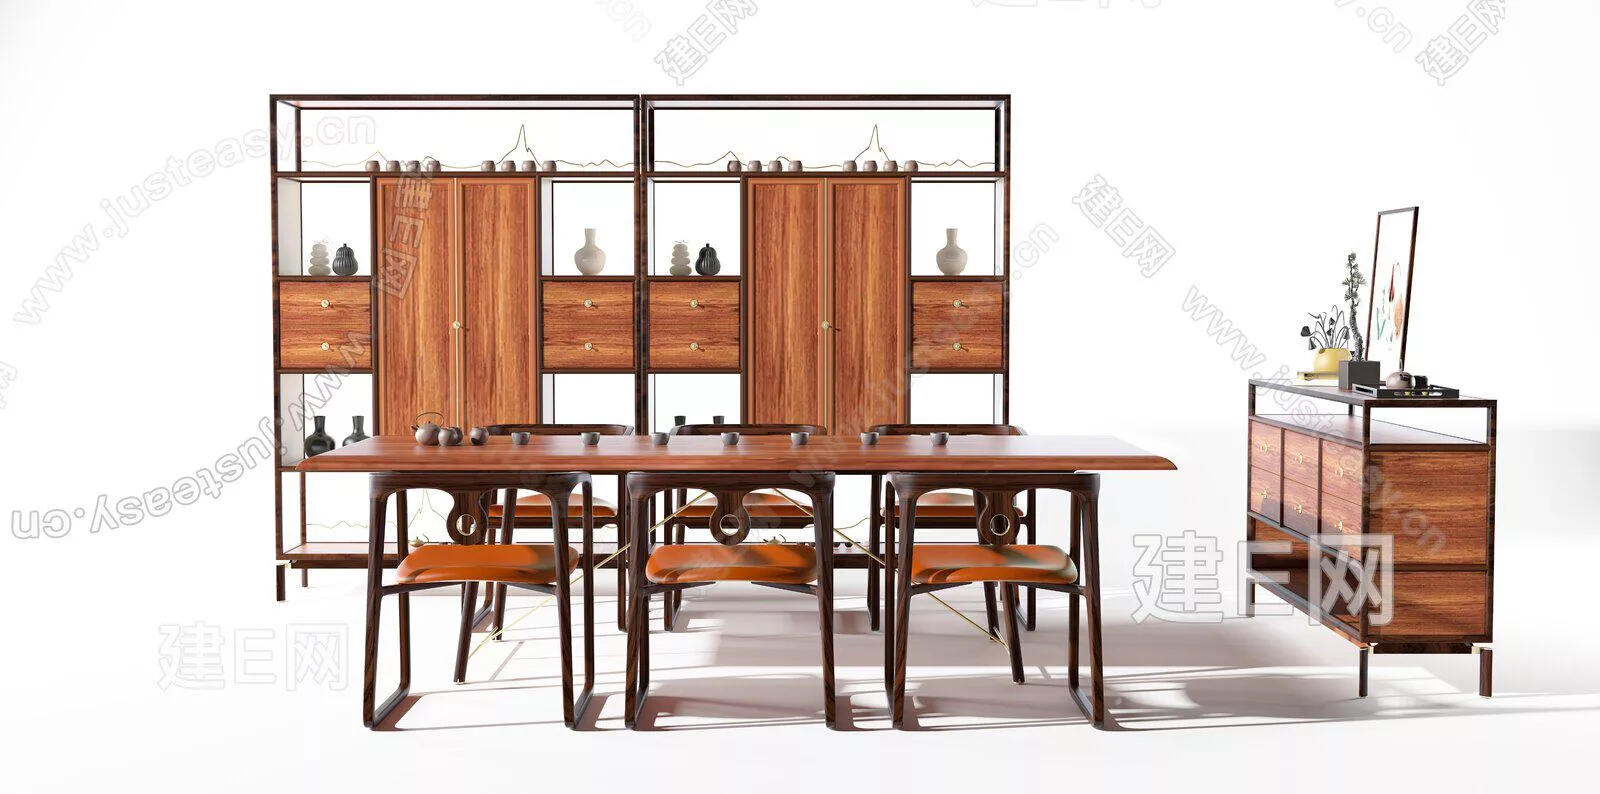 CHINESE DINING TABLE SET - SKETCHUP 3D MODEL - ENSCAPE - 111627706